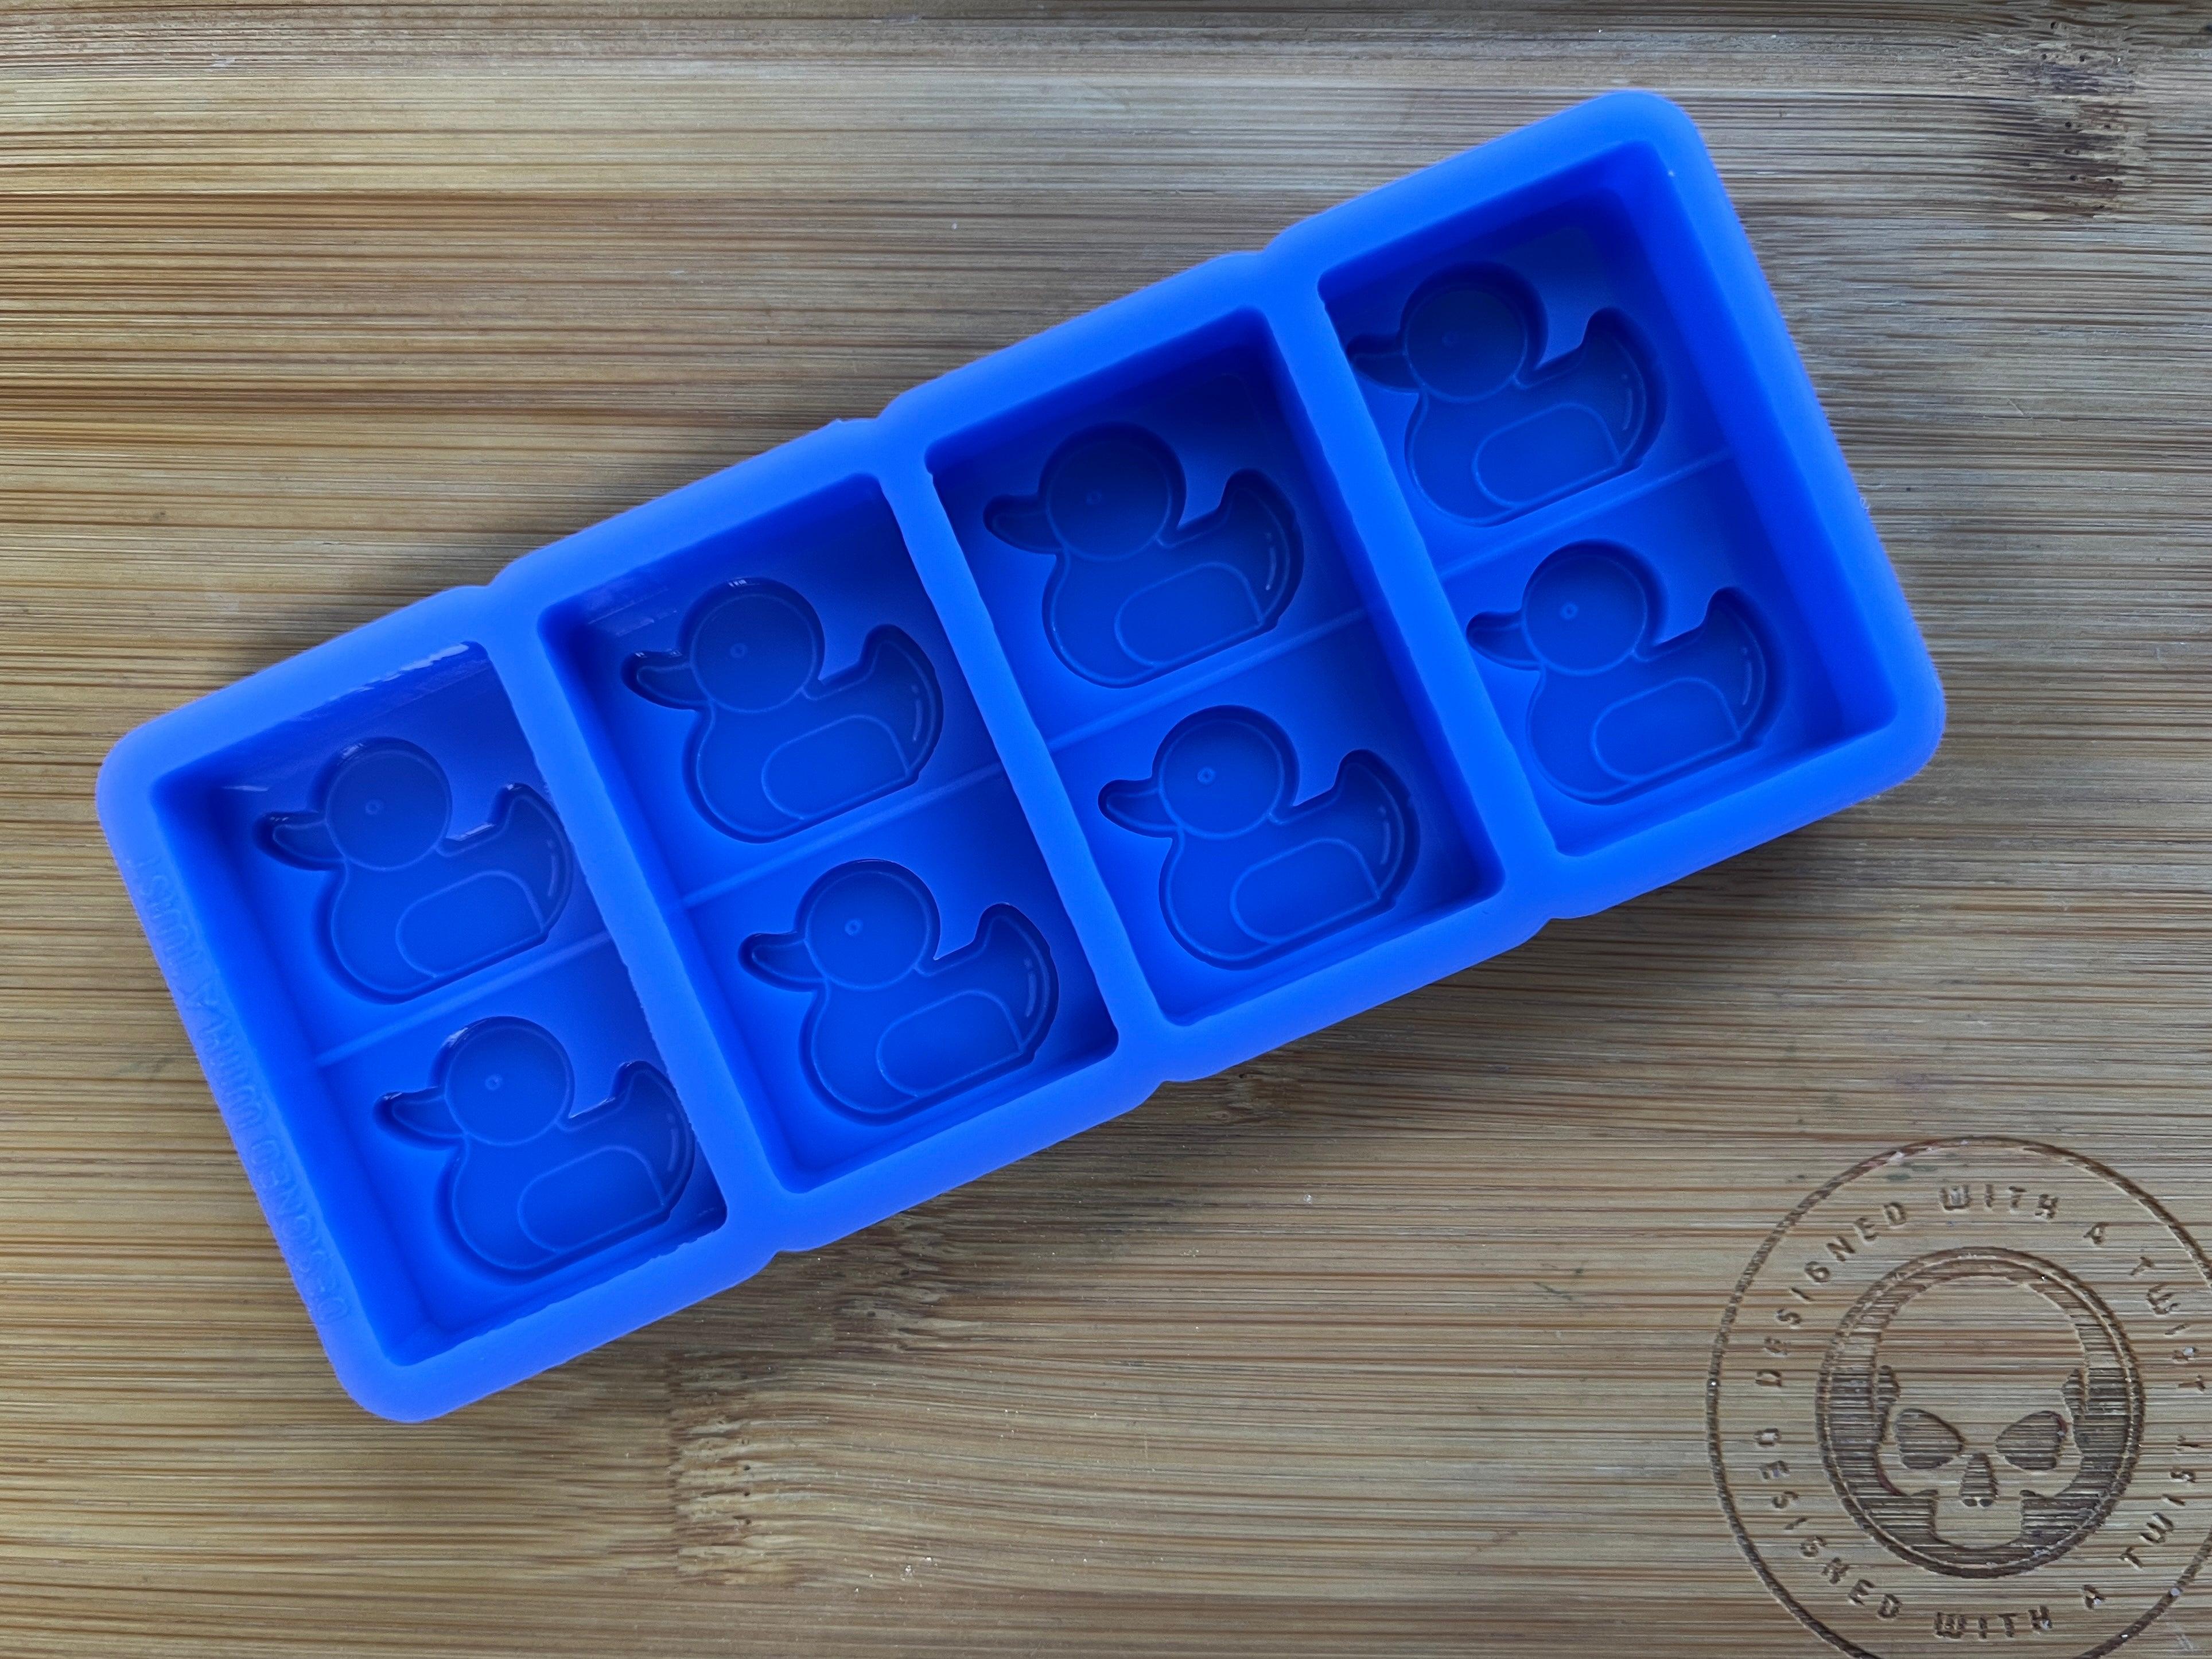 Rubber Duck Silicone Mold - HoBa Edition - Designed with a Twist - Top quality silicone molds made in the UK.